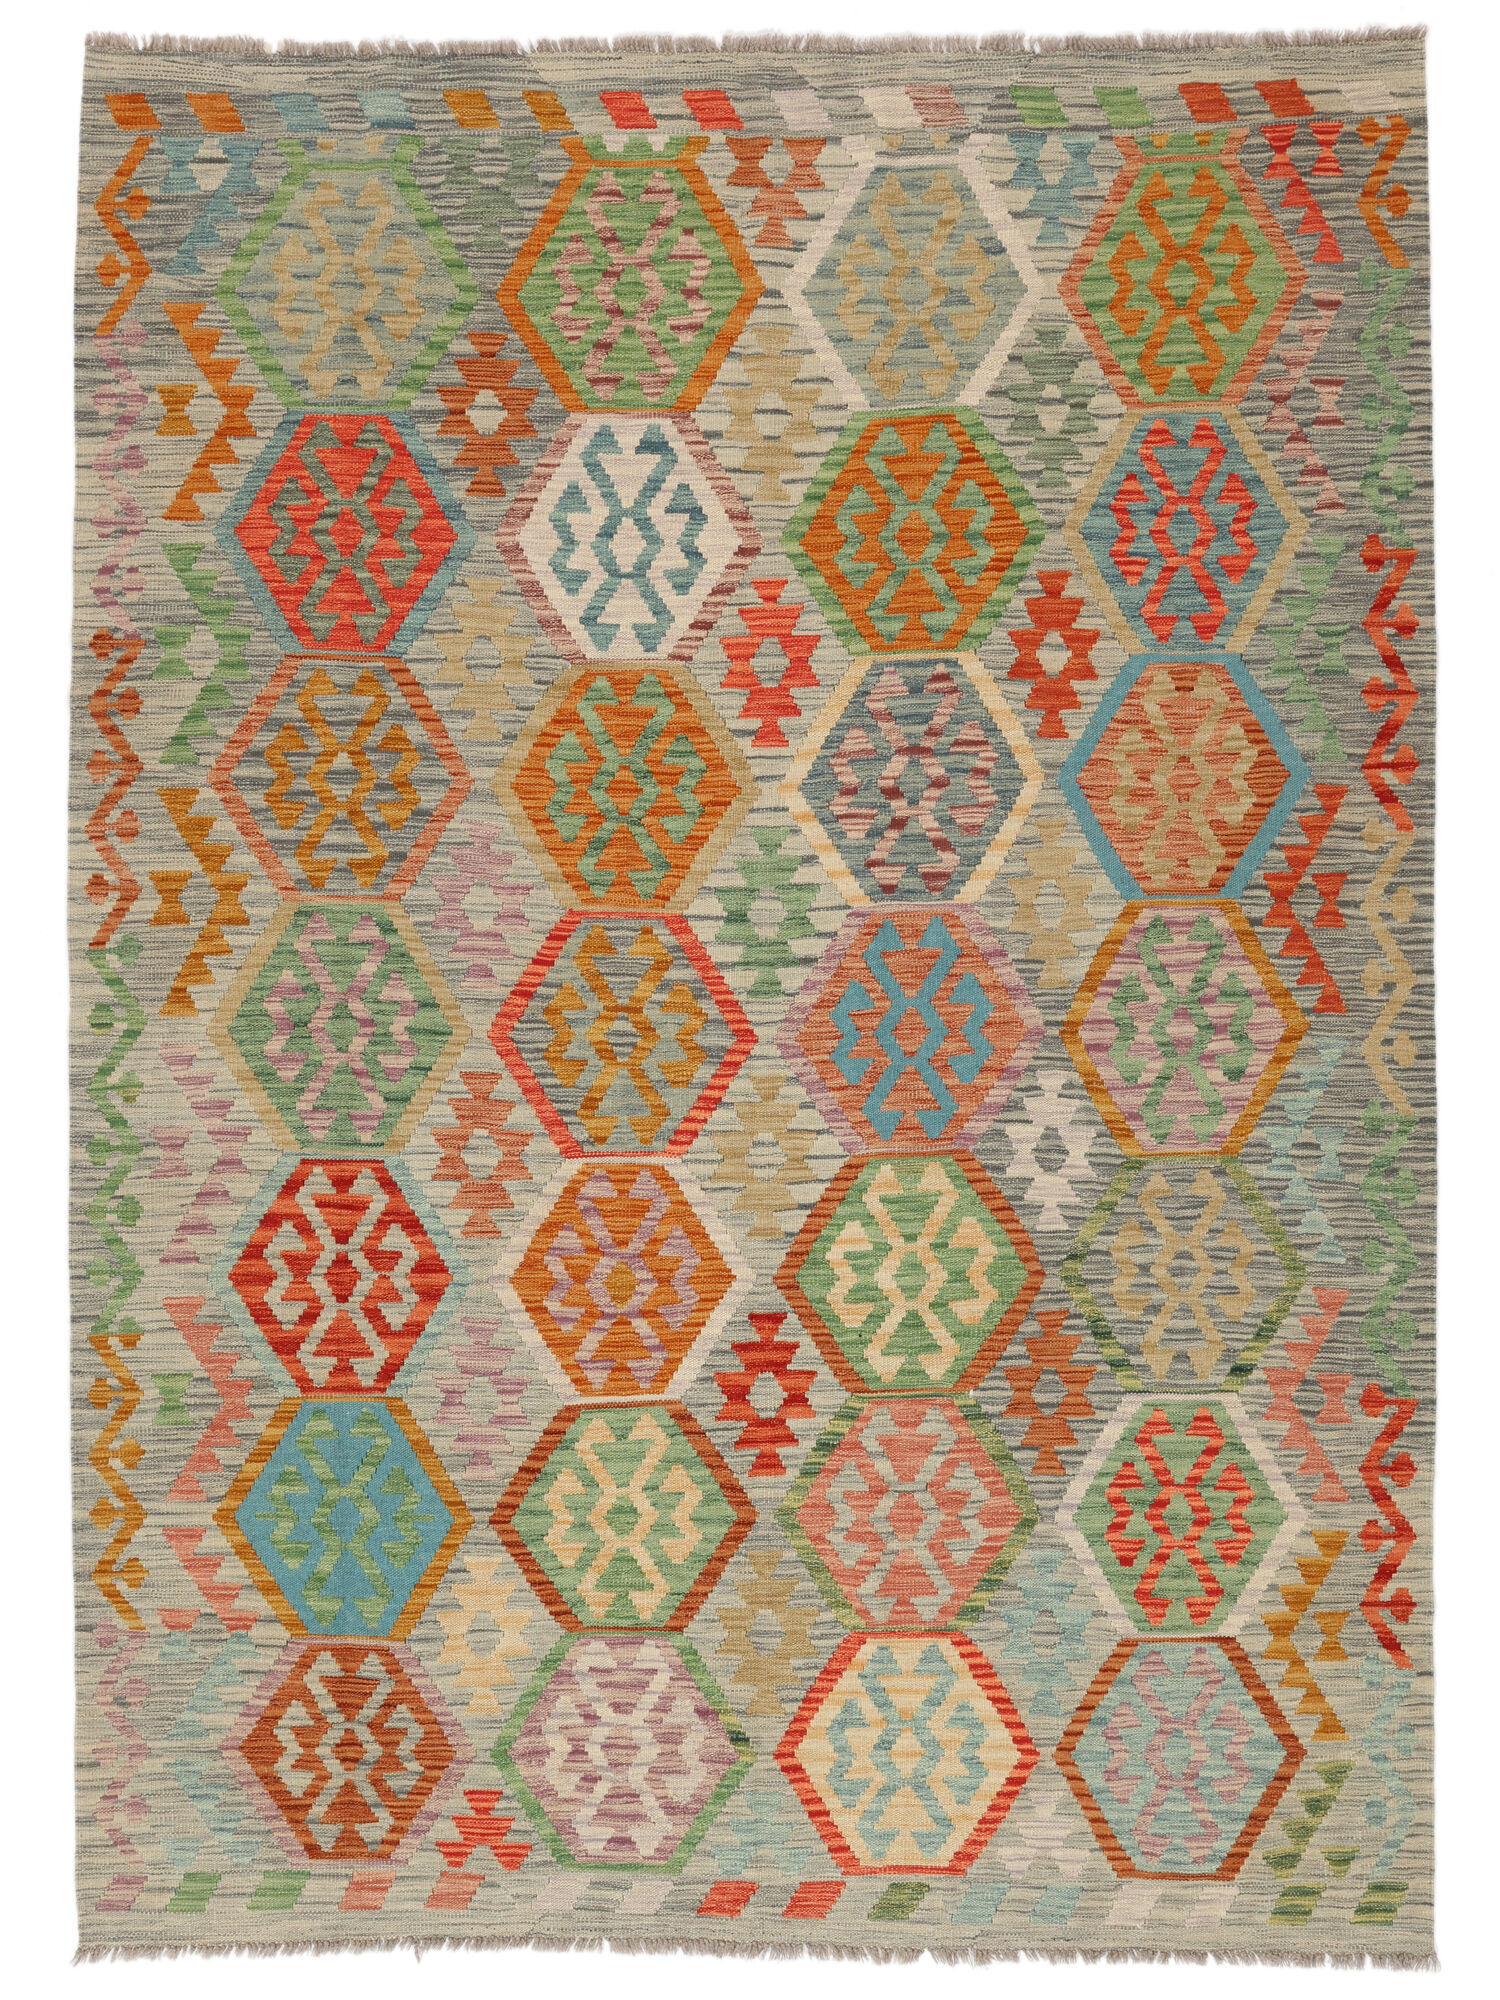 Annodato a mano. Provenienza: Afghanistan Kilim Afghan Old style Tappeto 208x290